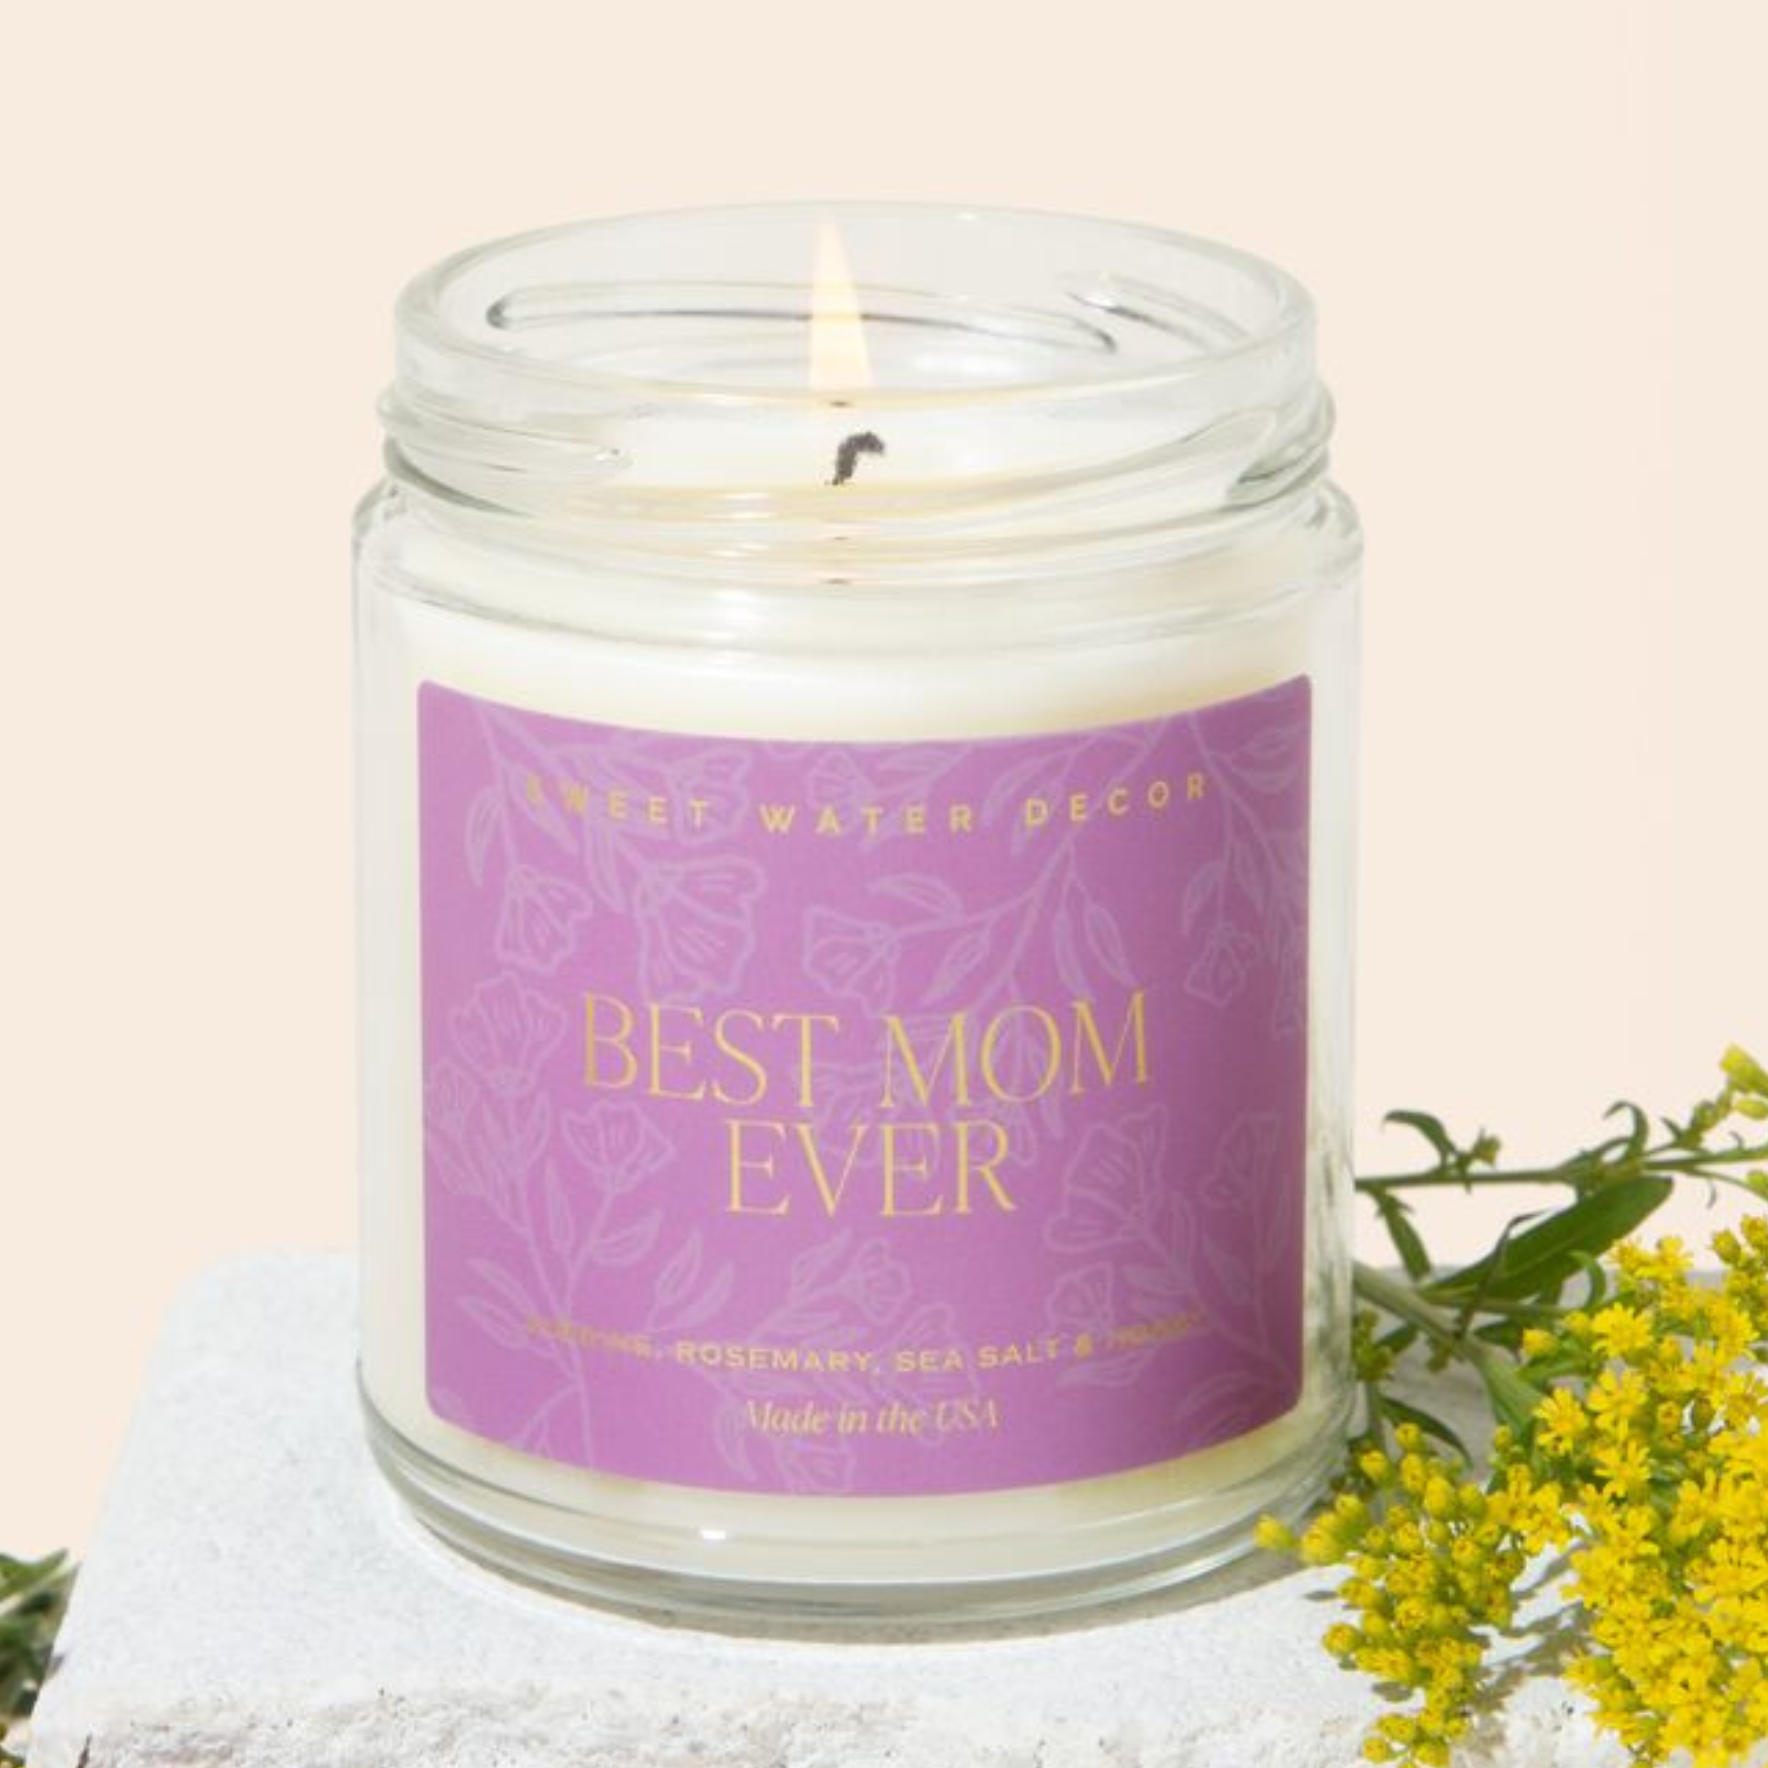 Best Mom Ever 9 oz Soy Candle (Gold Foil) - Mother's Day